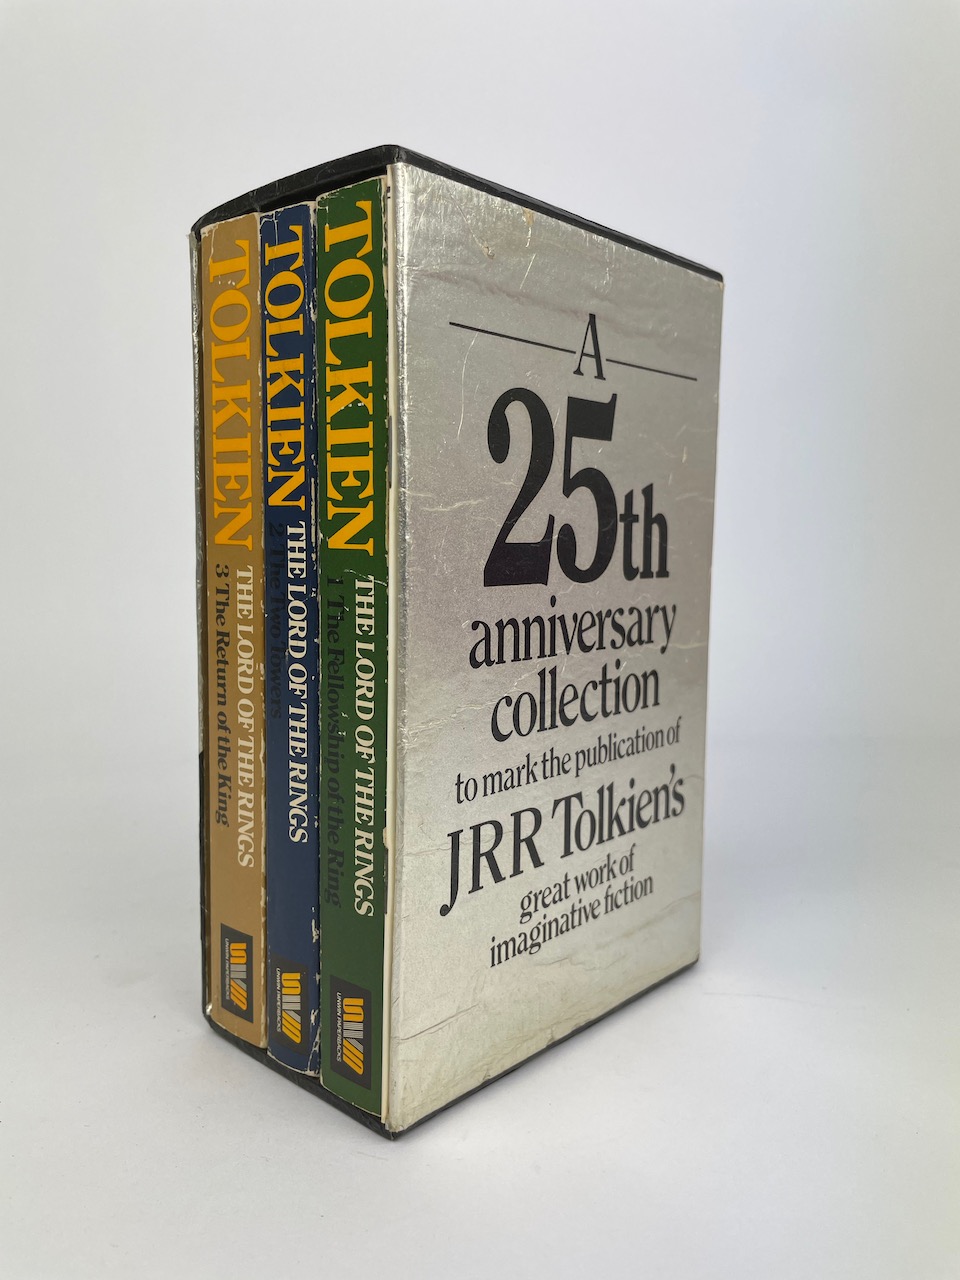 The Lord of the Rings 25th Anniversary Collection from 1980 by Unwin Paperbacks 5